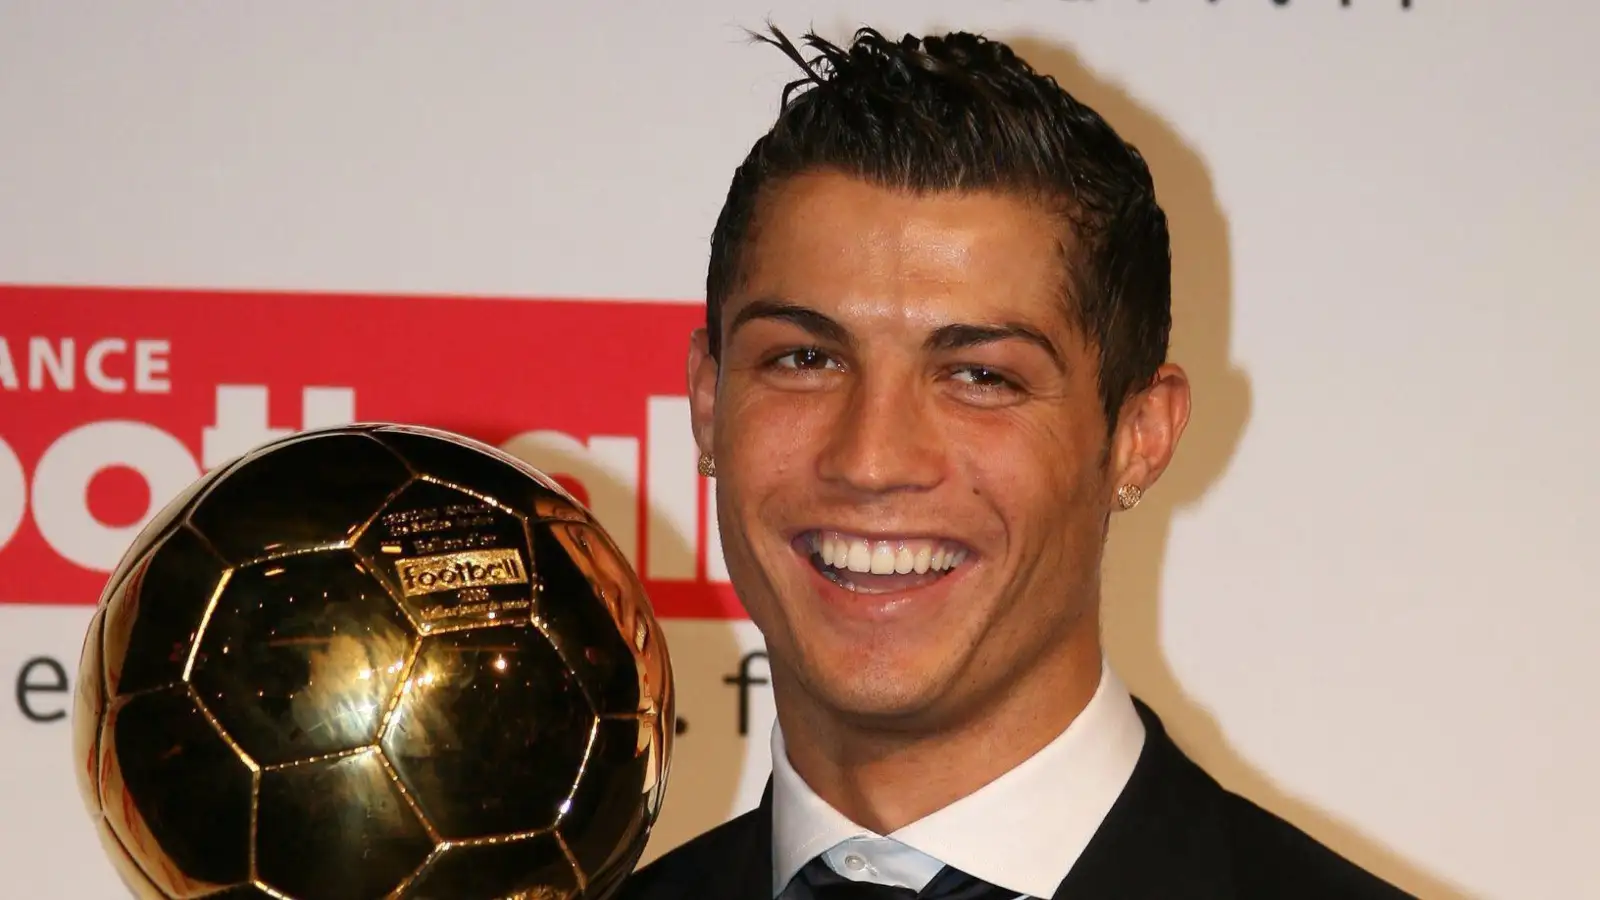 Can you name every player nominated for the 2008 Ballon d’Or award?